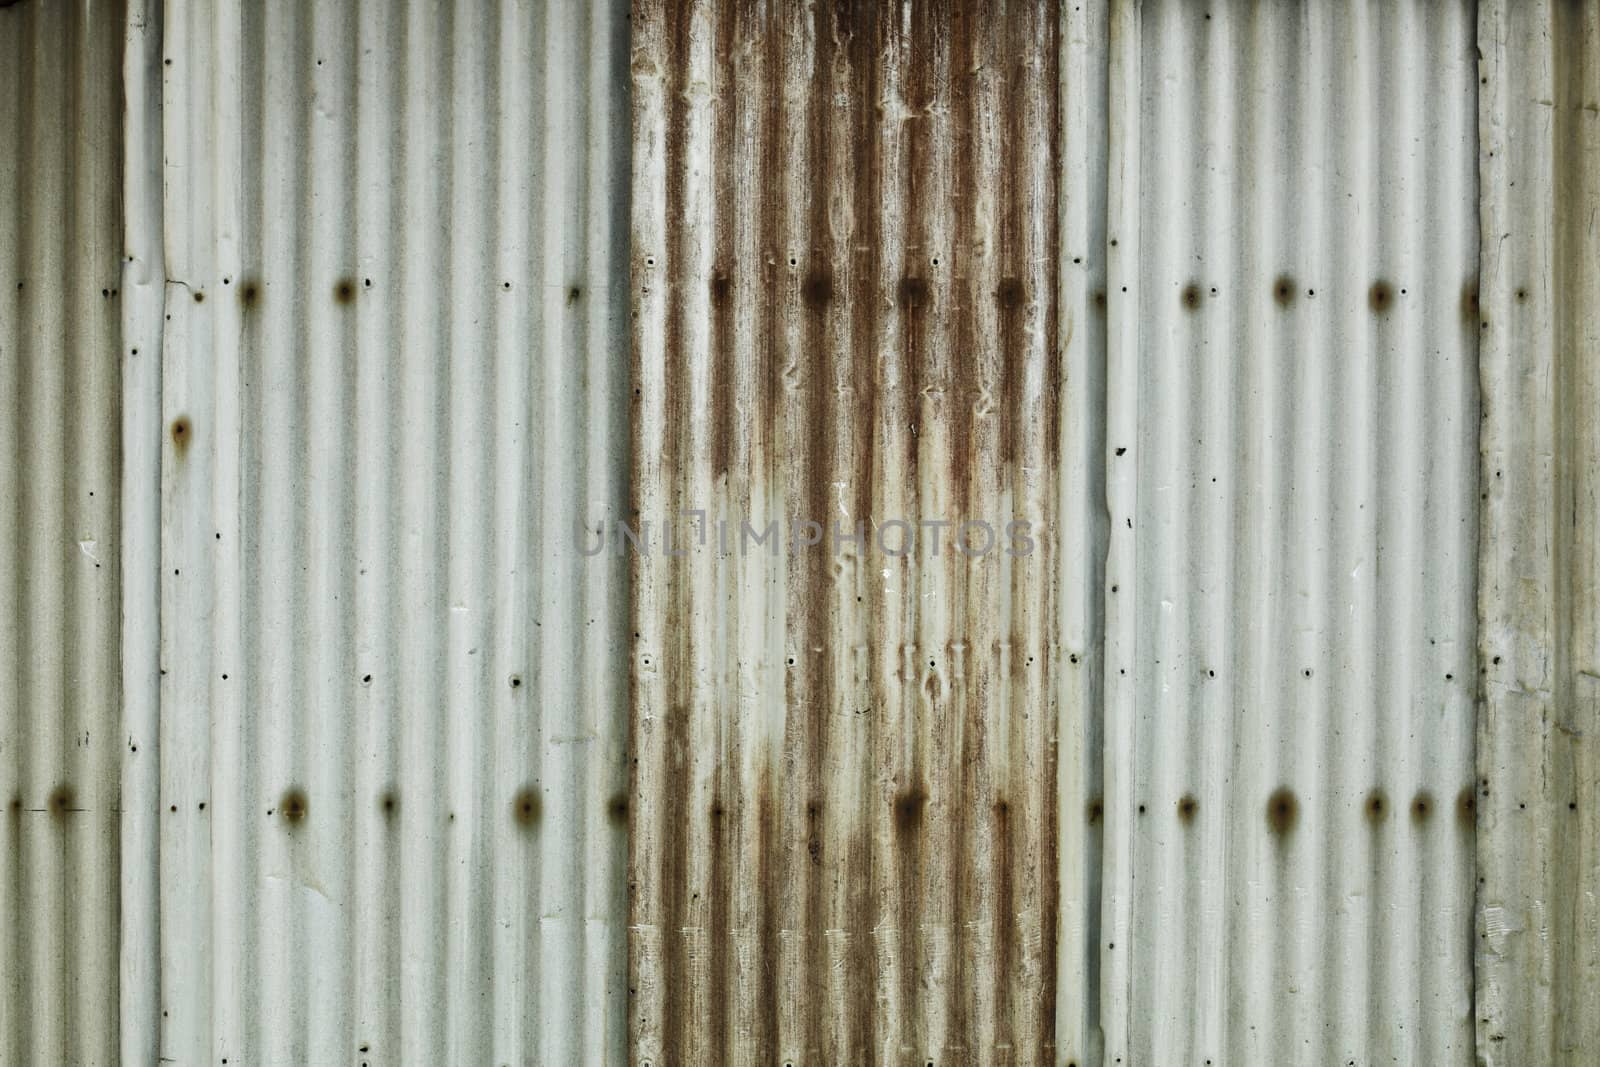 Grunge background made of corrugated metal sheets